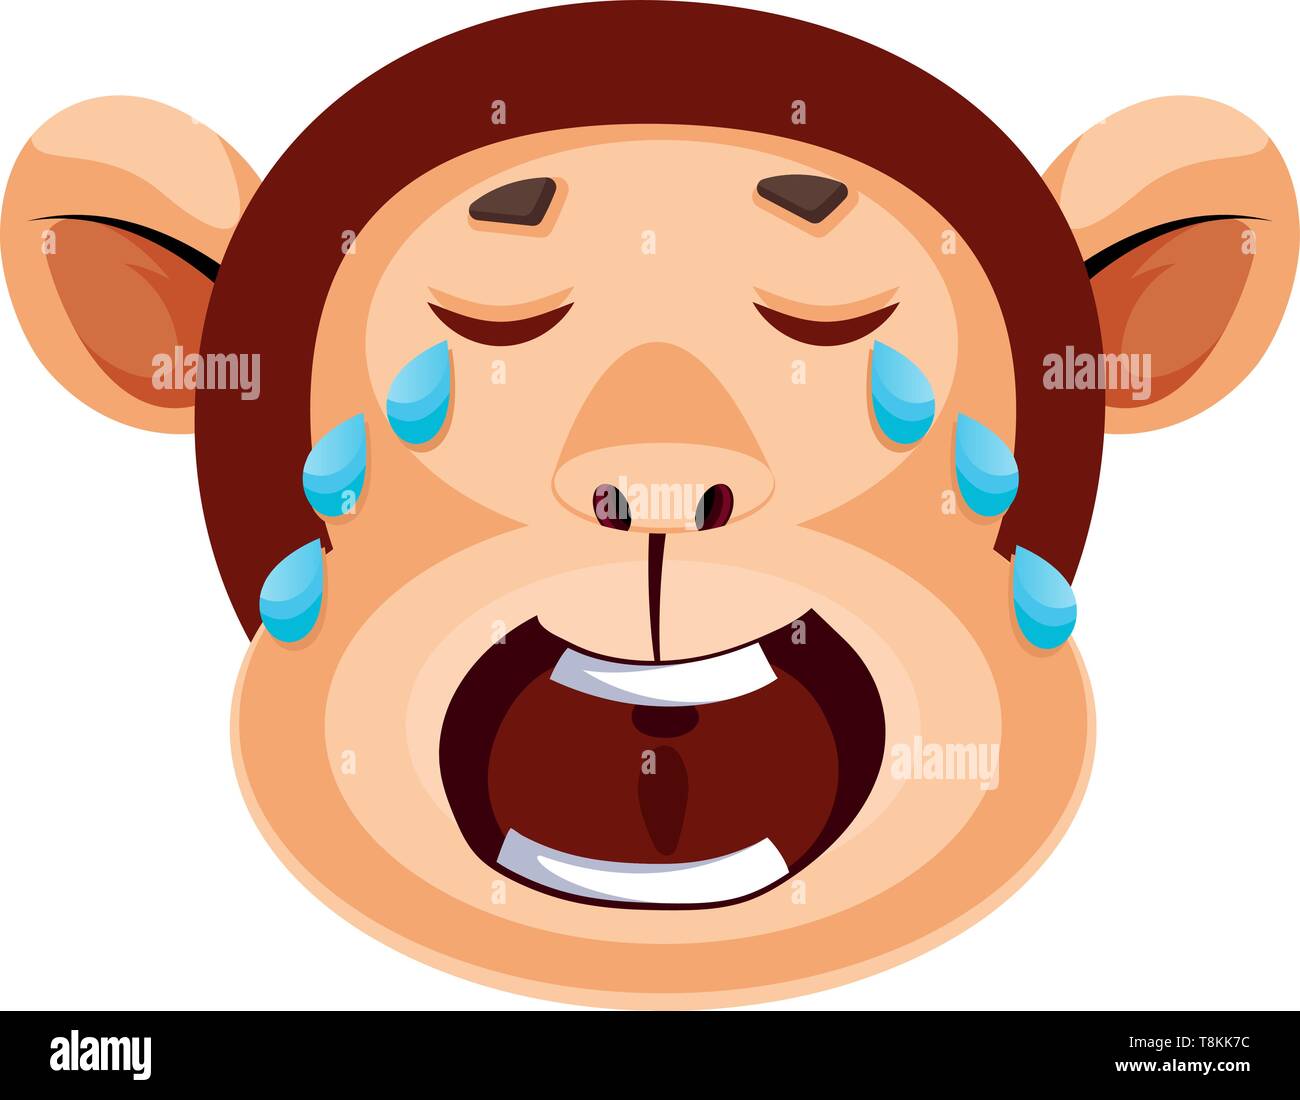 Monkey is crying, illustration, vector on white background. Stock Vector